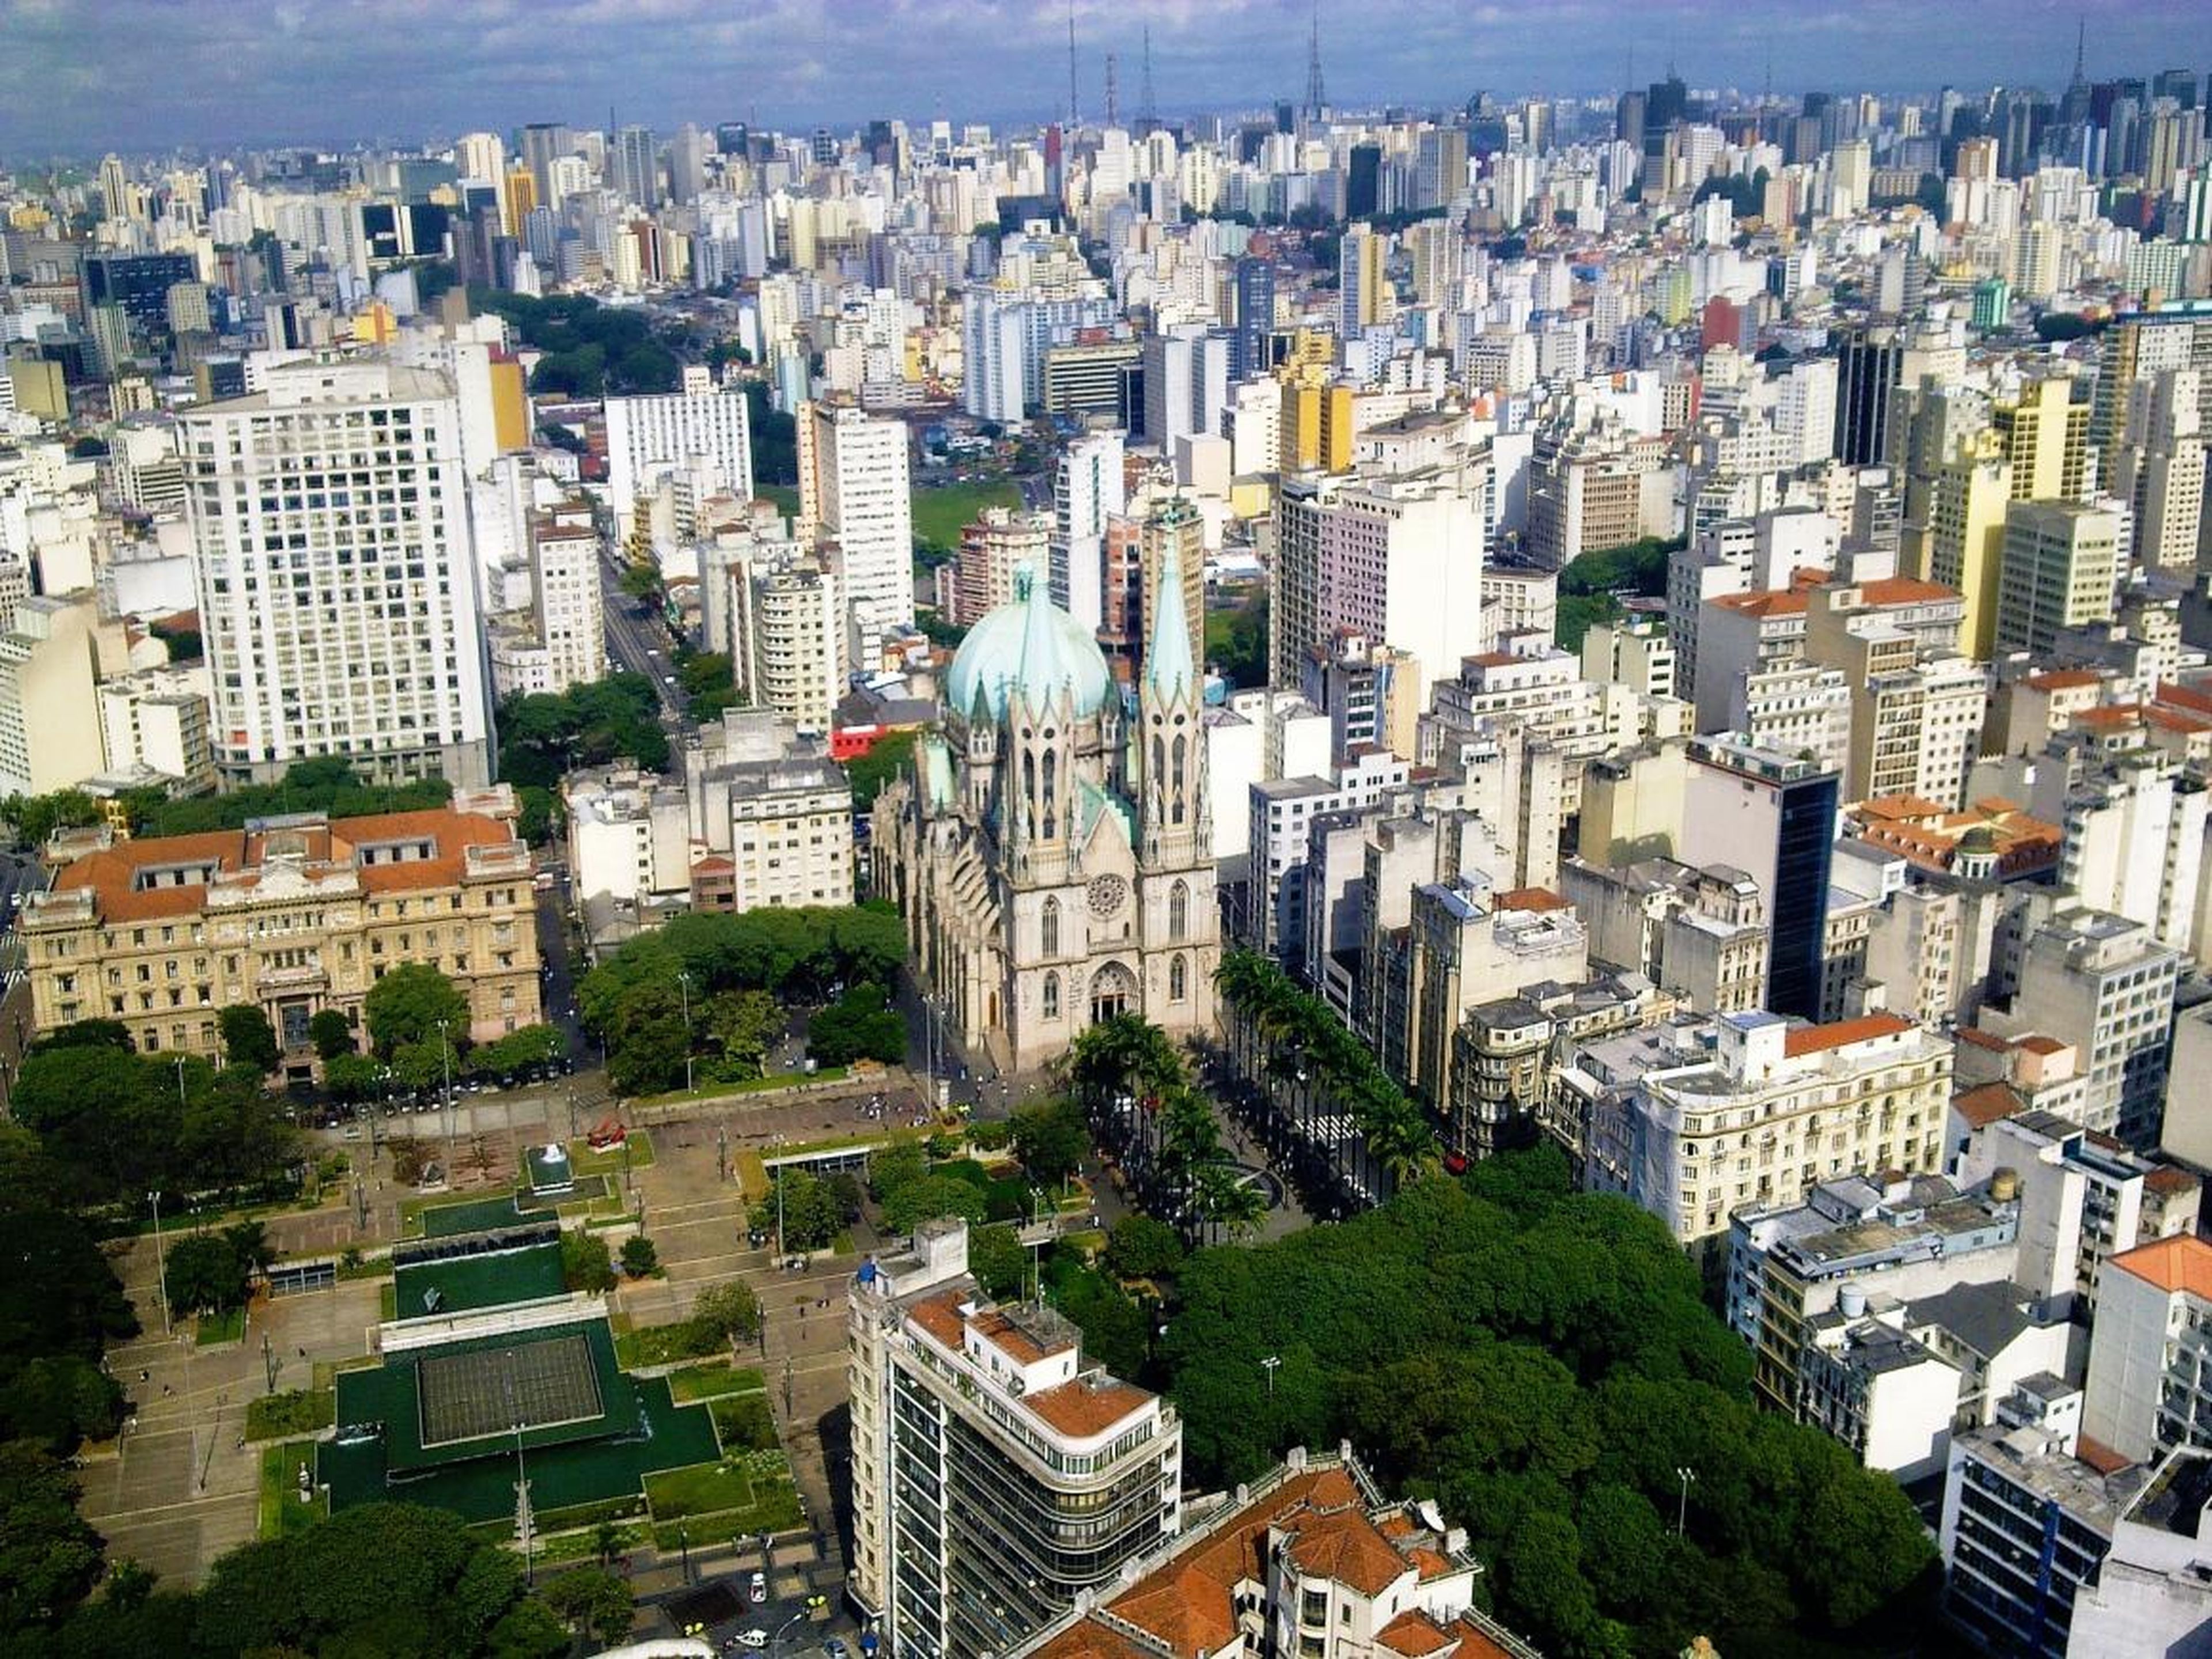 4. Sao Paulo is the most populous city in Brazil, the largest country in South America.